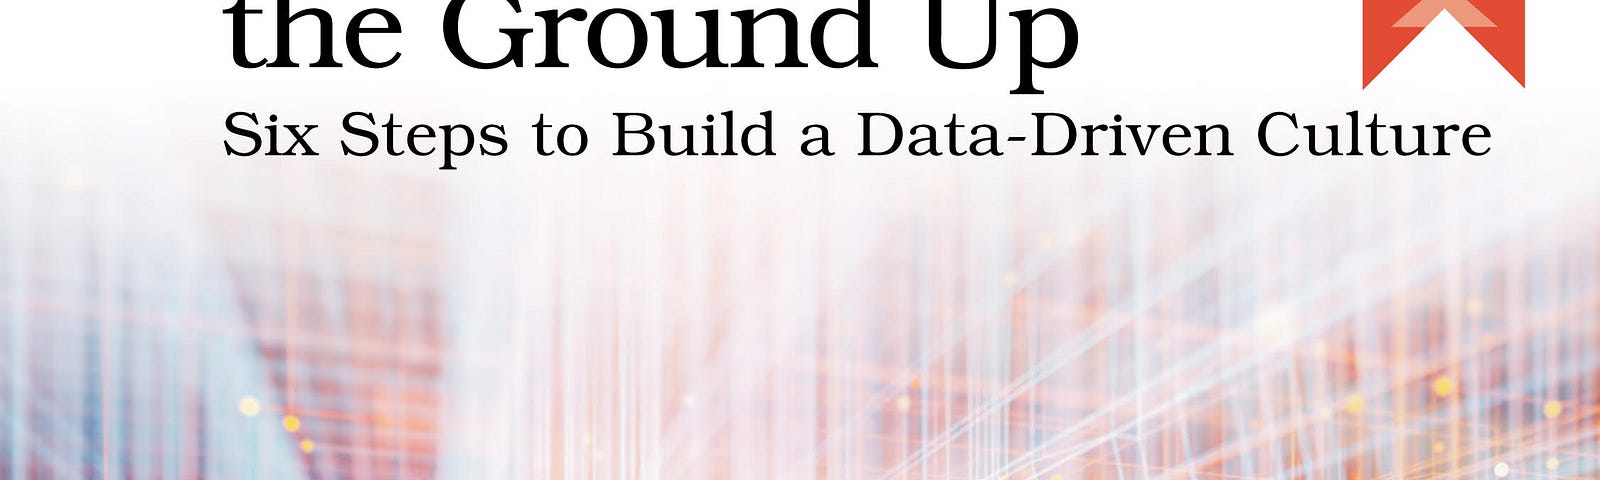 Cover for book by Lauren Maffeo: Designing Data Governance from the Ground Up featuring people standing is a large room with a re-toned grid of light across the walls